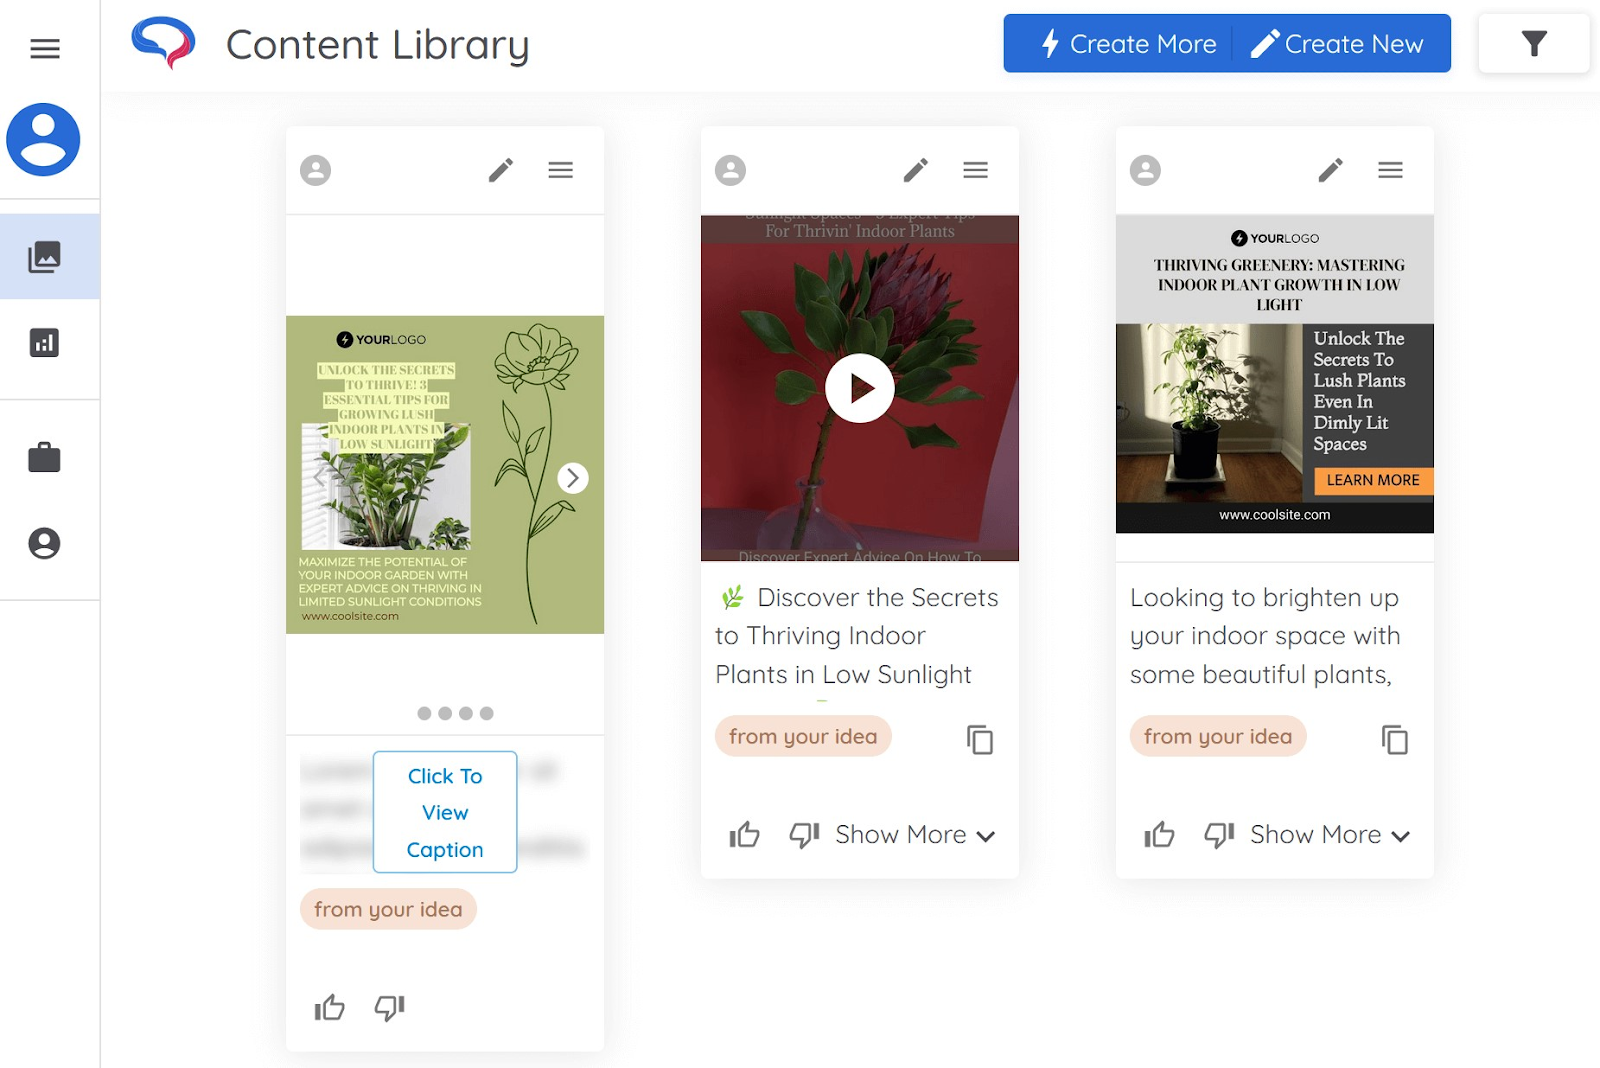 examples of ready social media posts from "Content Library"